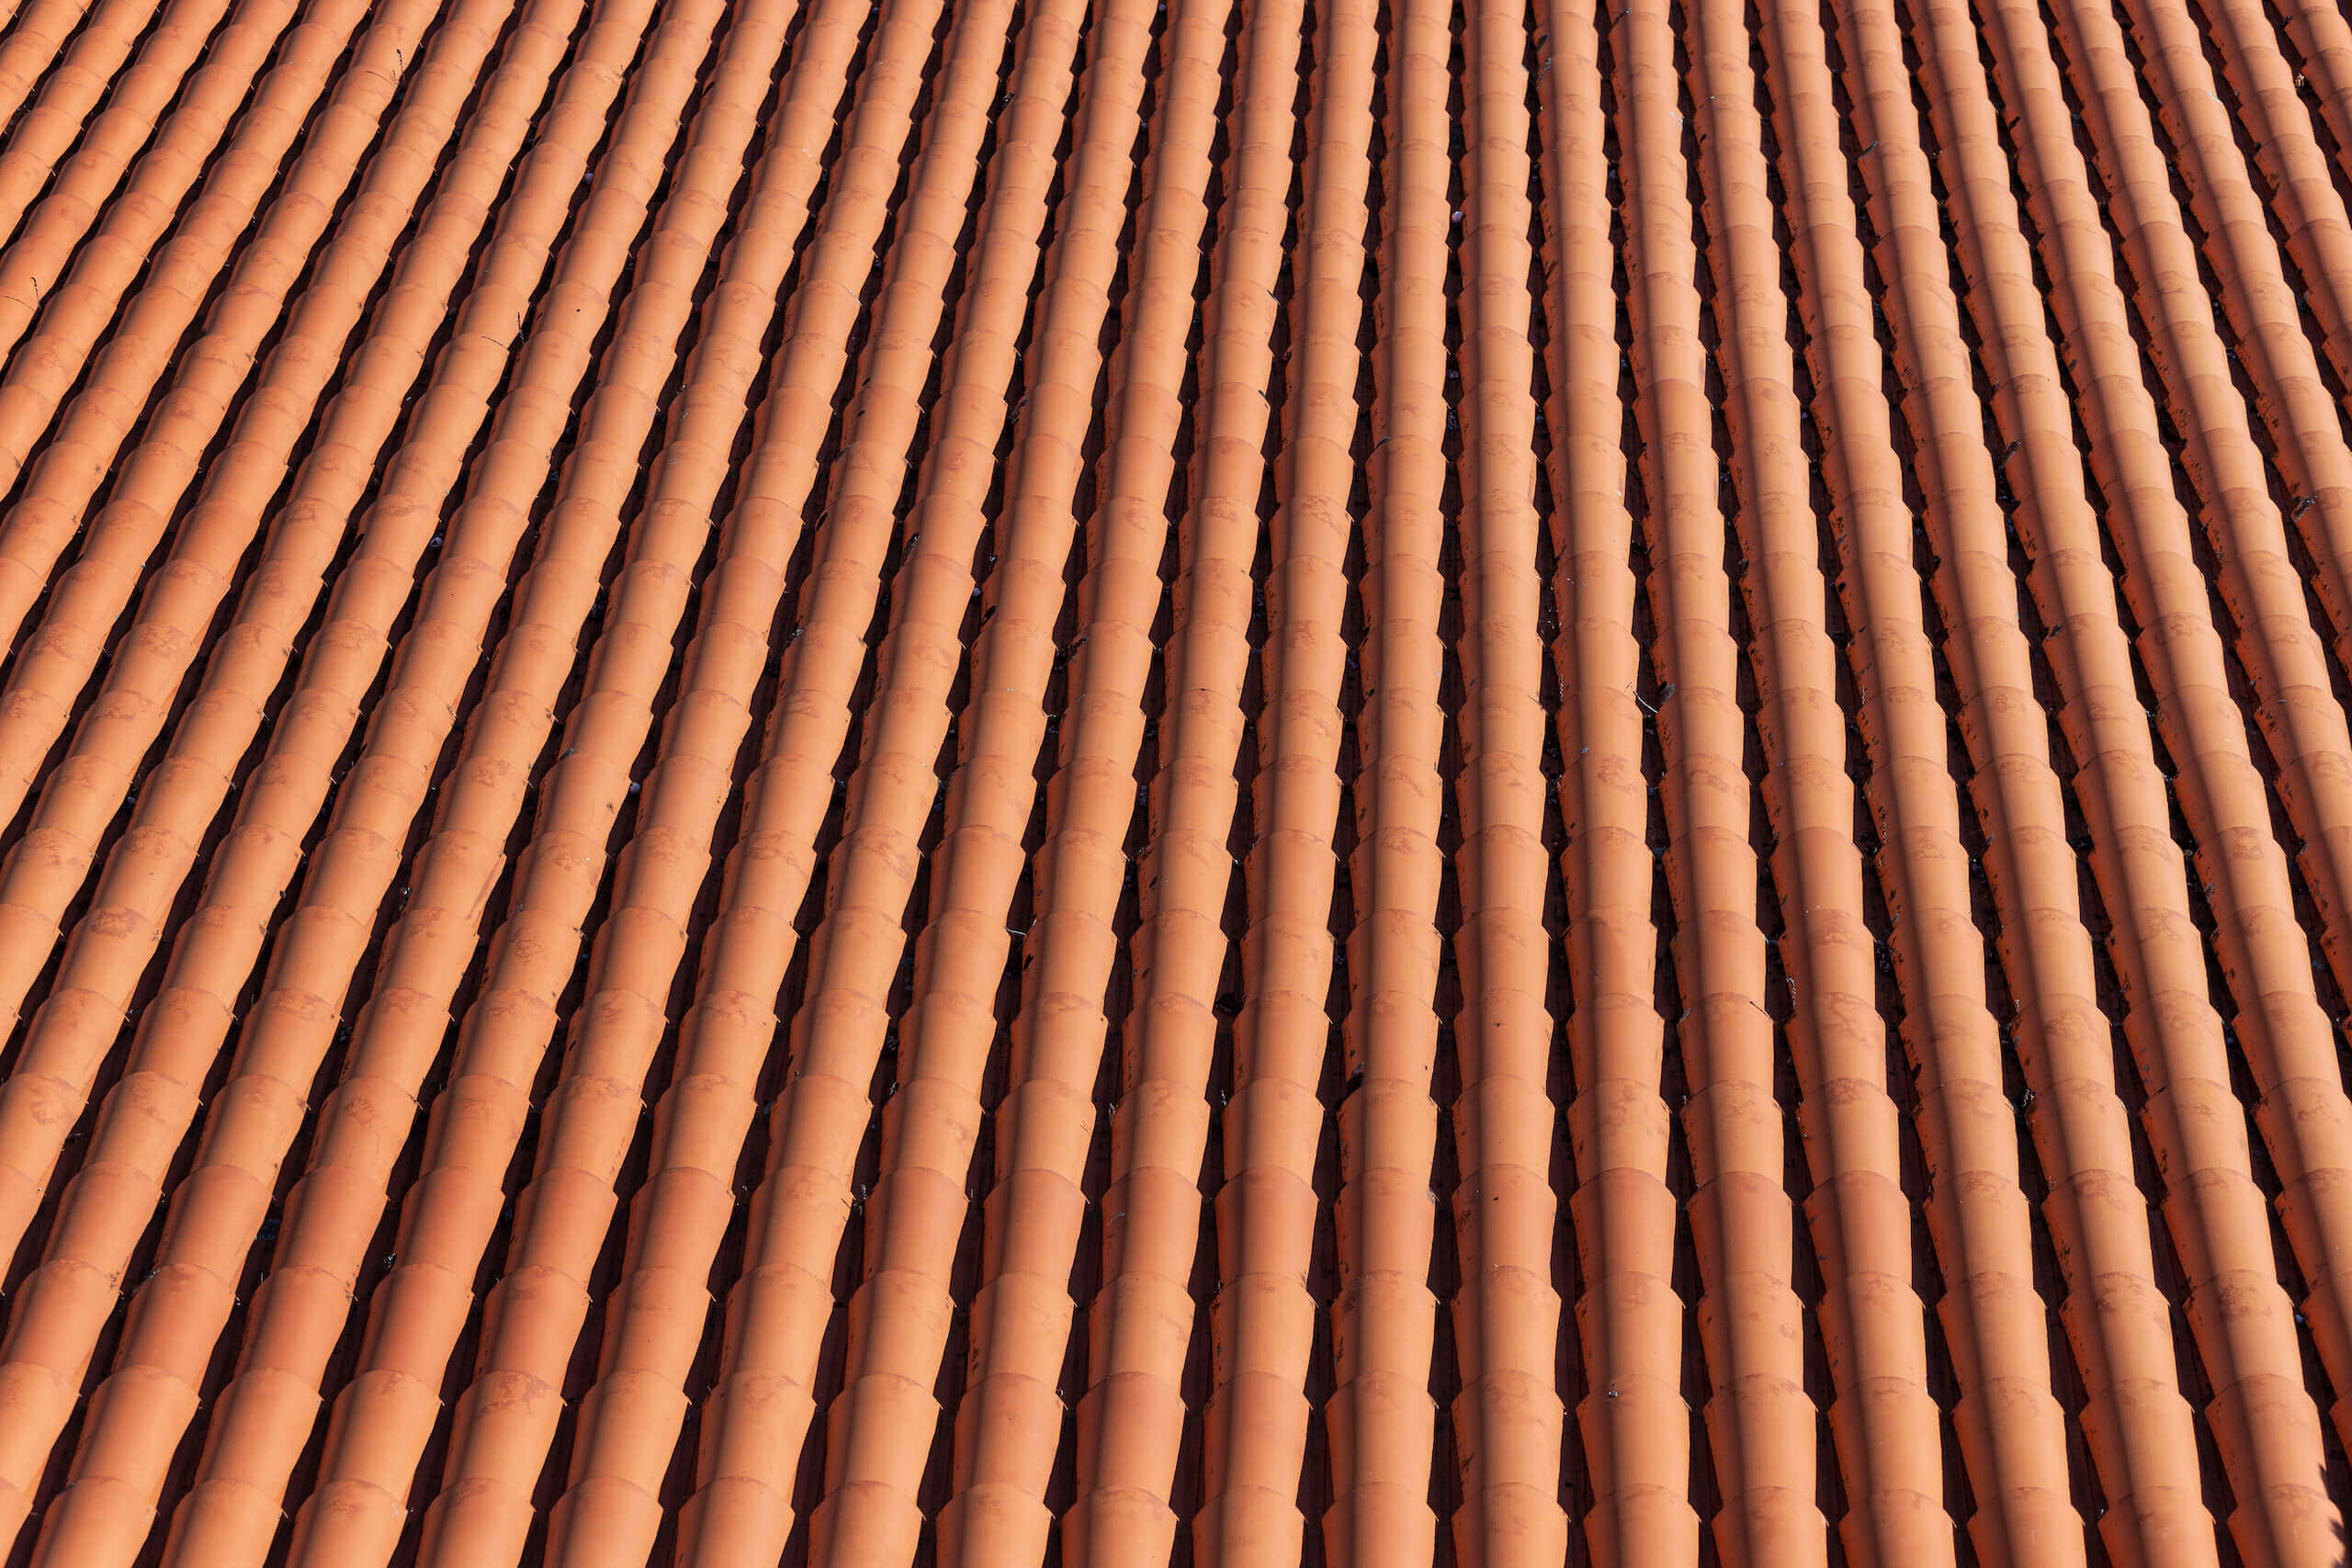 traditional red clay roof tiles background 2022 12 16 11 15 40 utc 1